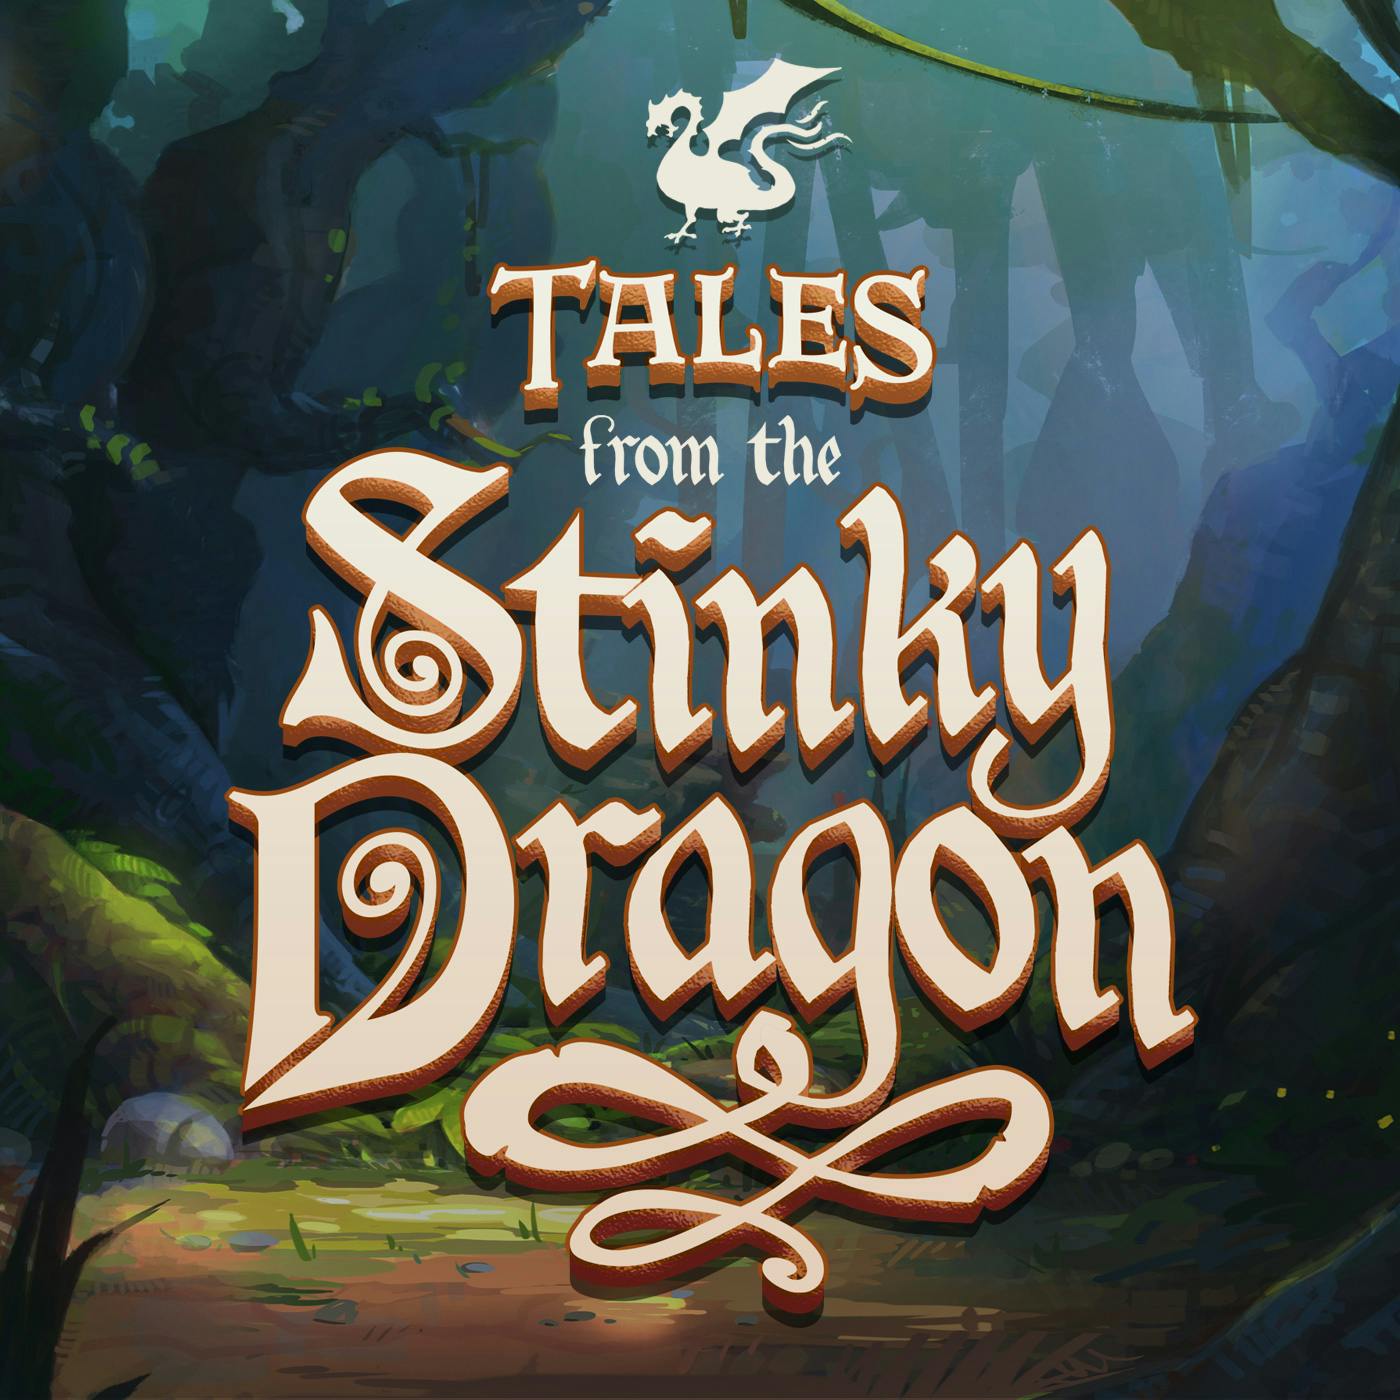 Introducing Tales from the Stinky Dragon